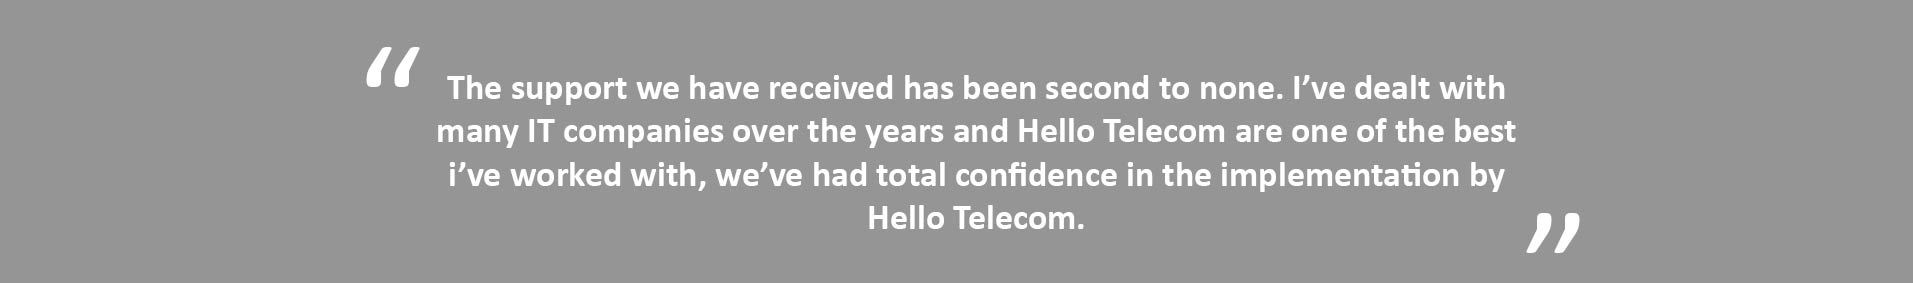 Hello Telecom VoIP for education quote 